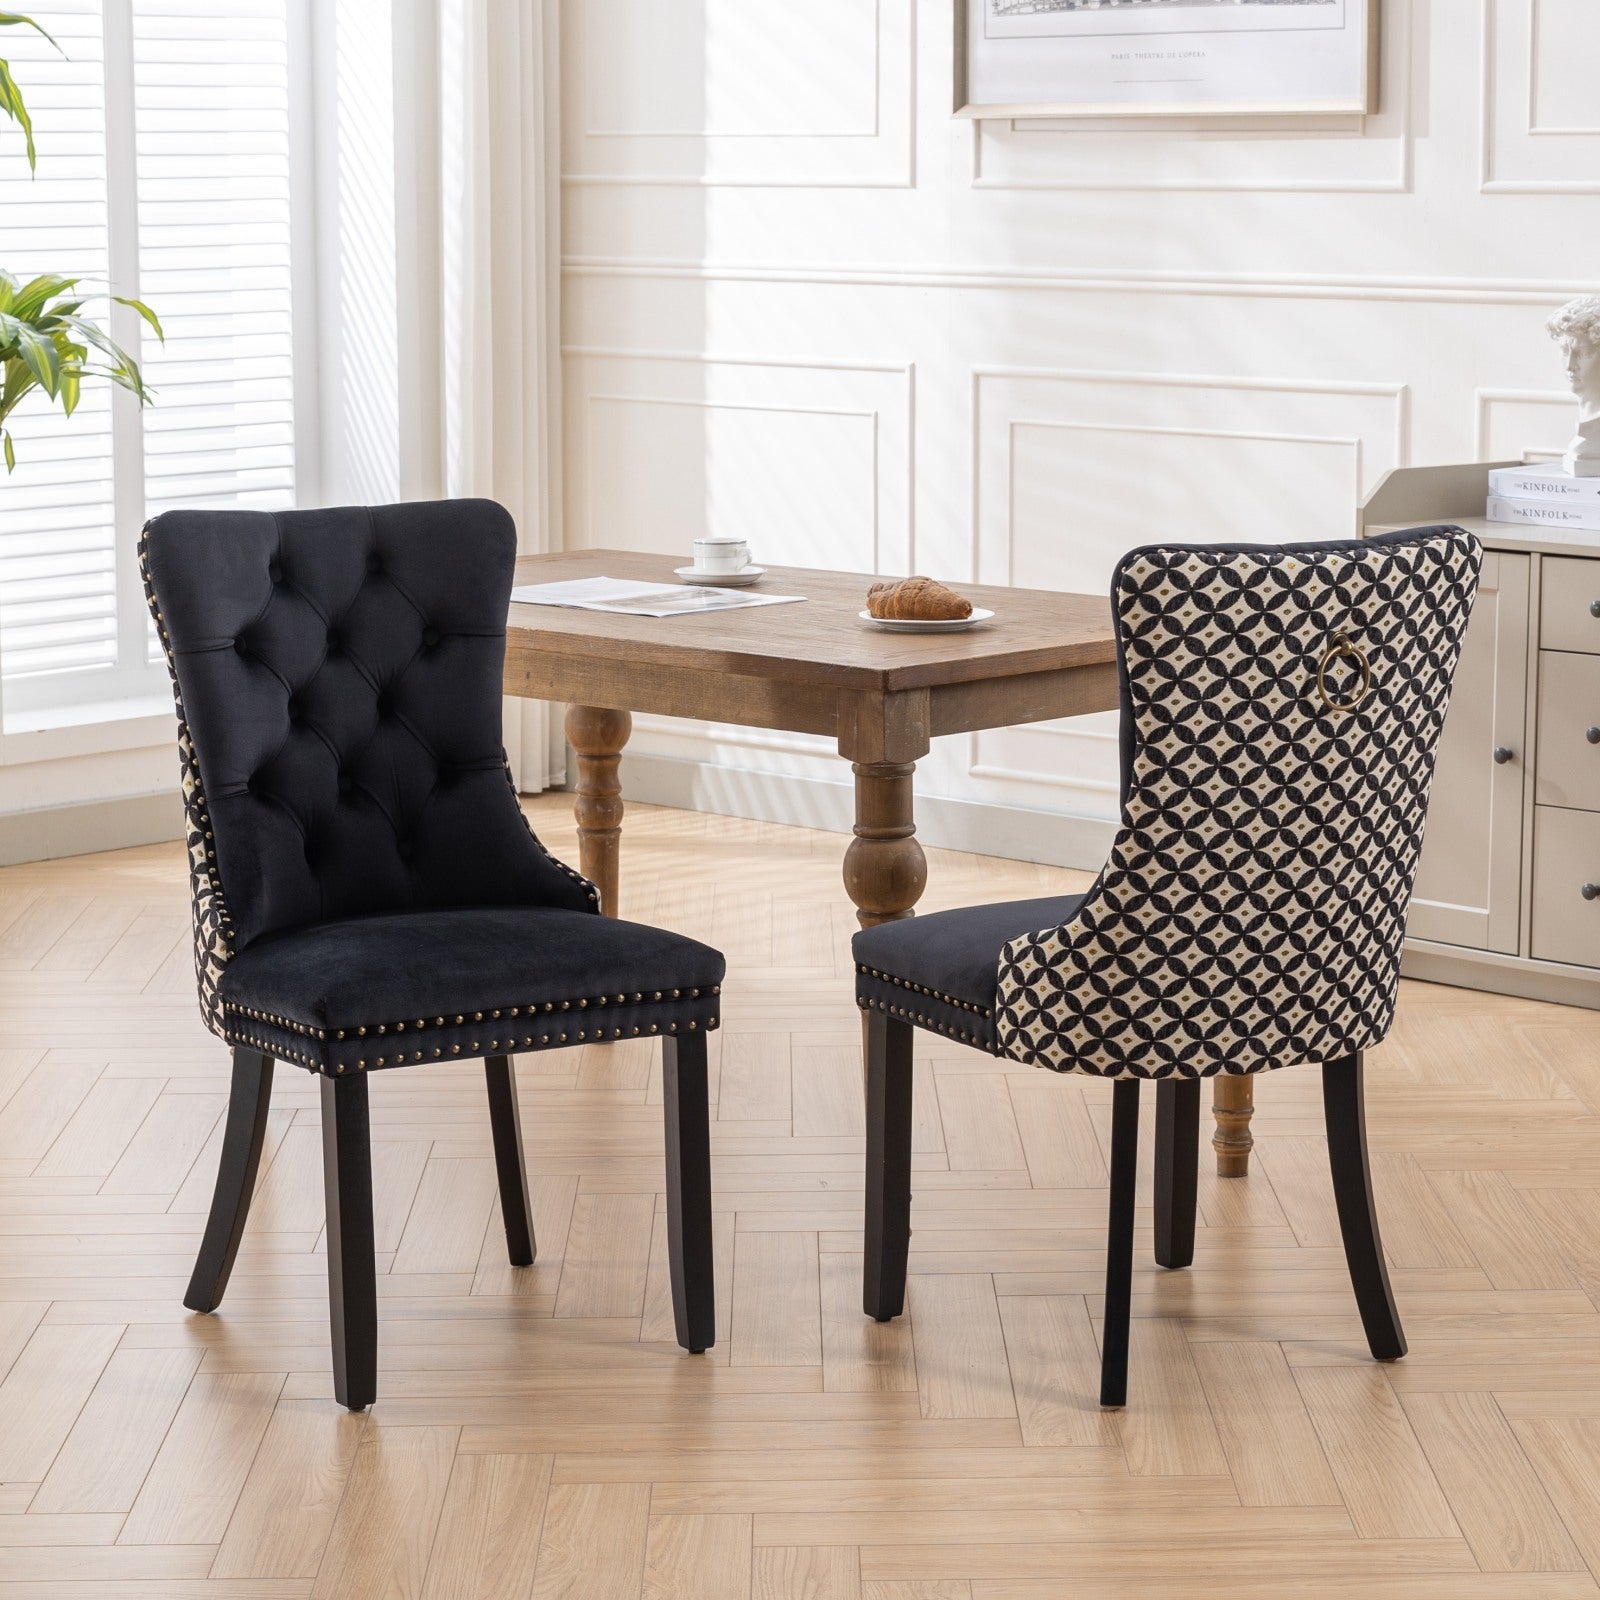 🆓🚛 Classic Velvet Dining Chairs, High-End Tufted, Solid Wood, Contemporary, Wood Legs, Nailhead, Set of 2, Black & Patterned